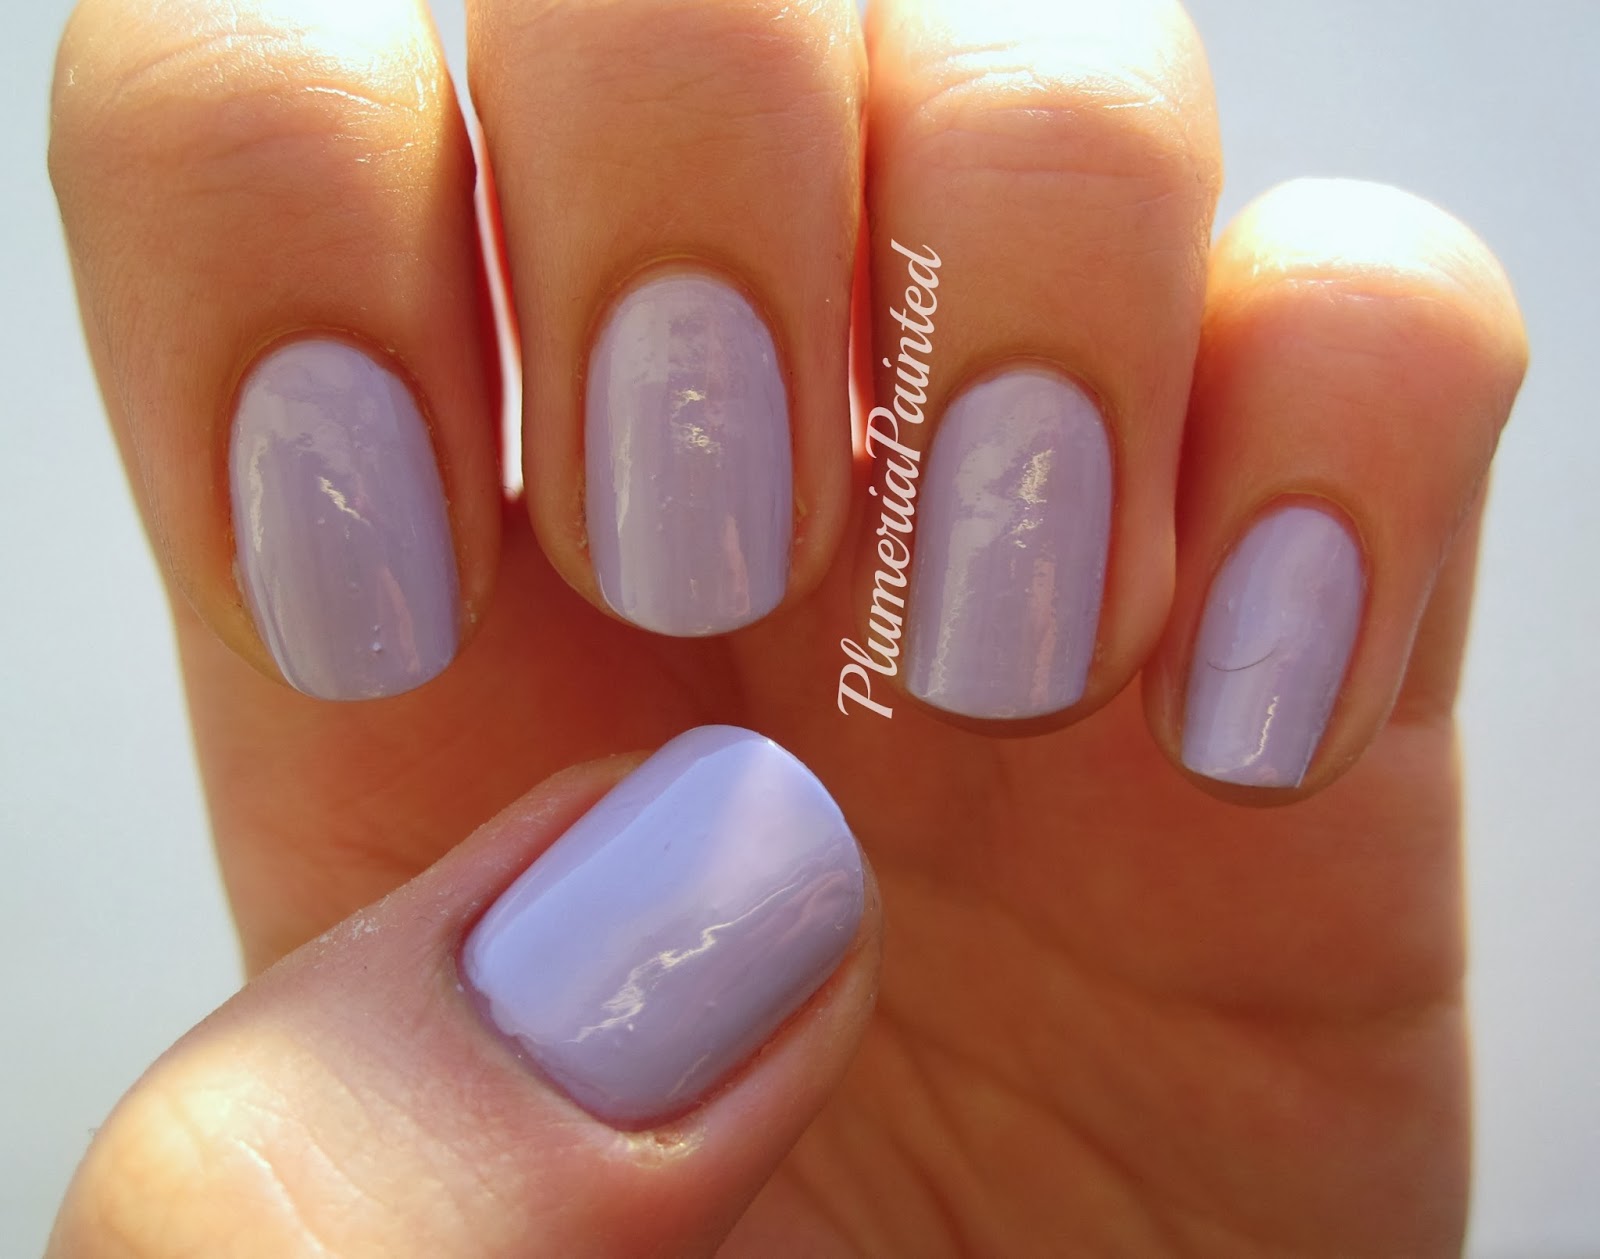 2. Essie Nail Polish in "Lilacism" - wide 6